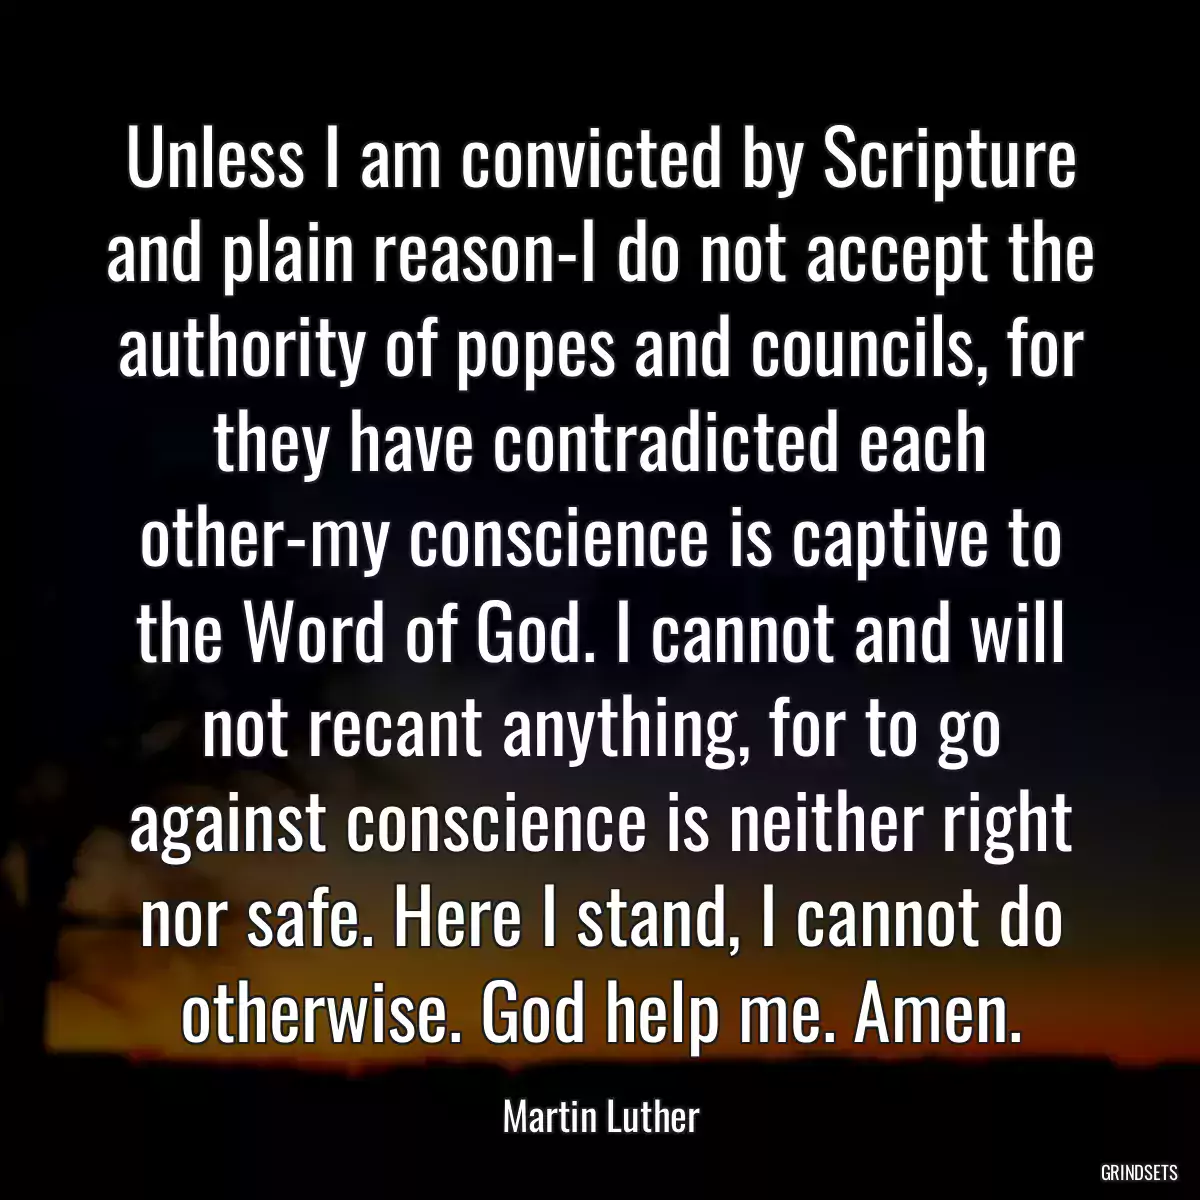 Unless I am convicted by Scripture and plain reason-I do not accept the authority of popes and councils, for they have contradicted each other-my conscience is captive to the Word of God. I cannot and will not recant anything, for to go against conscience is neither right nor safe. Here I stand, I cannot do otherwise. God help me. Amen.